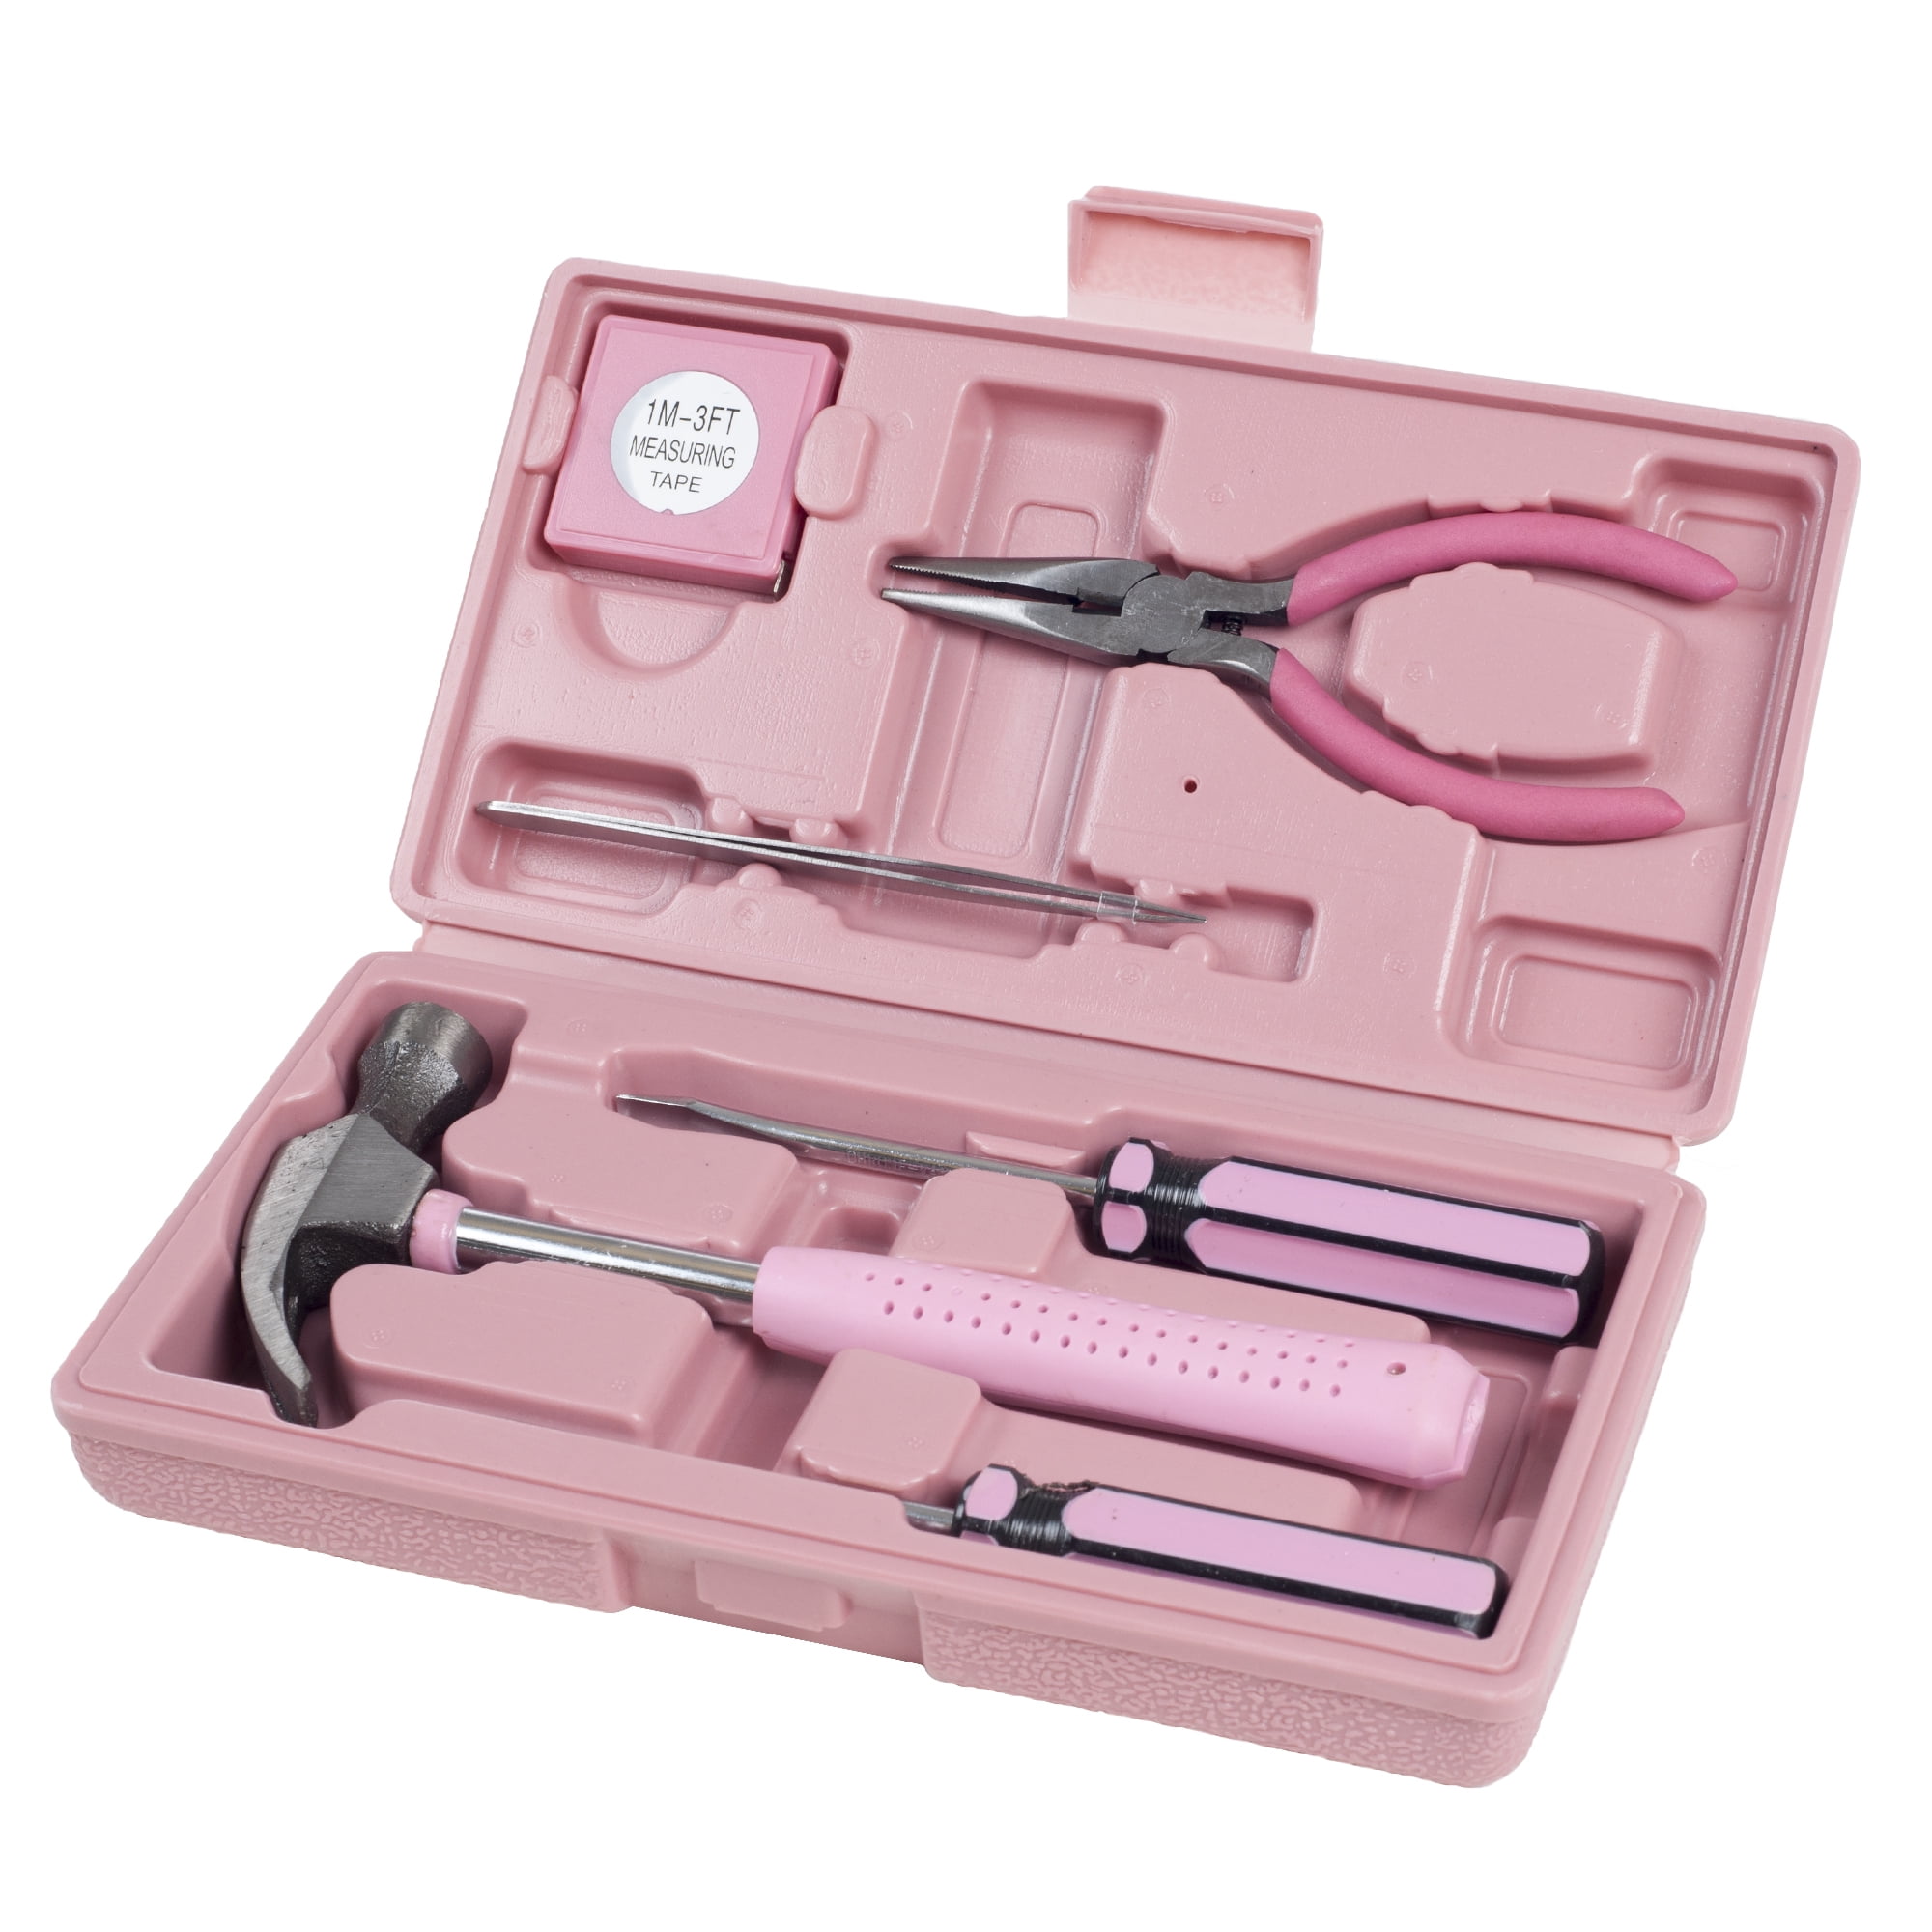 Stalwart - 75-HT2007 Household Hand Tools Pink Tool Set - 9 Piece by Set Includes Hammer Screwdriver Set Pliers (Tool Kit for The Home